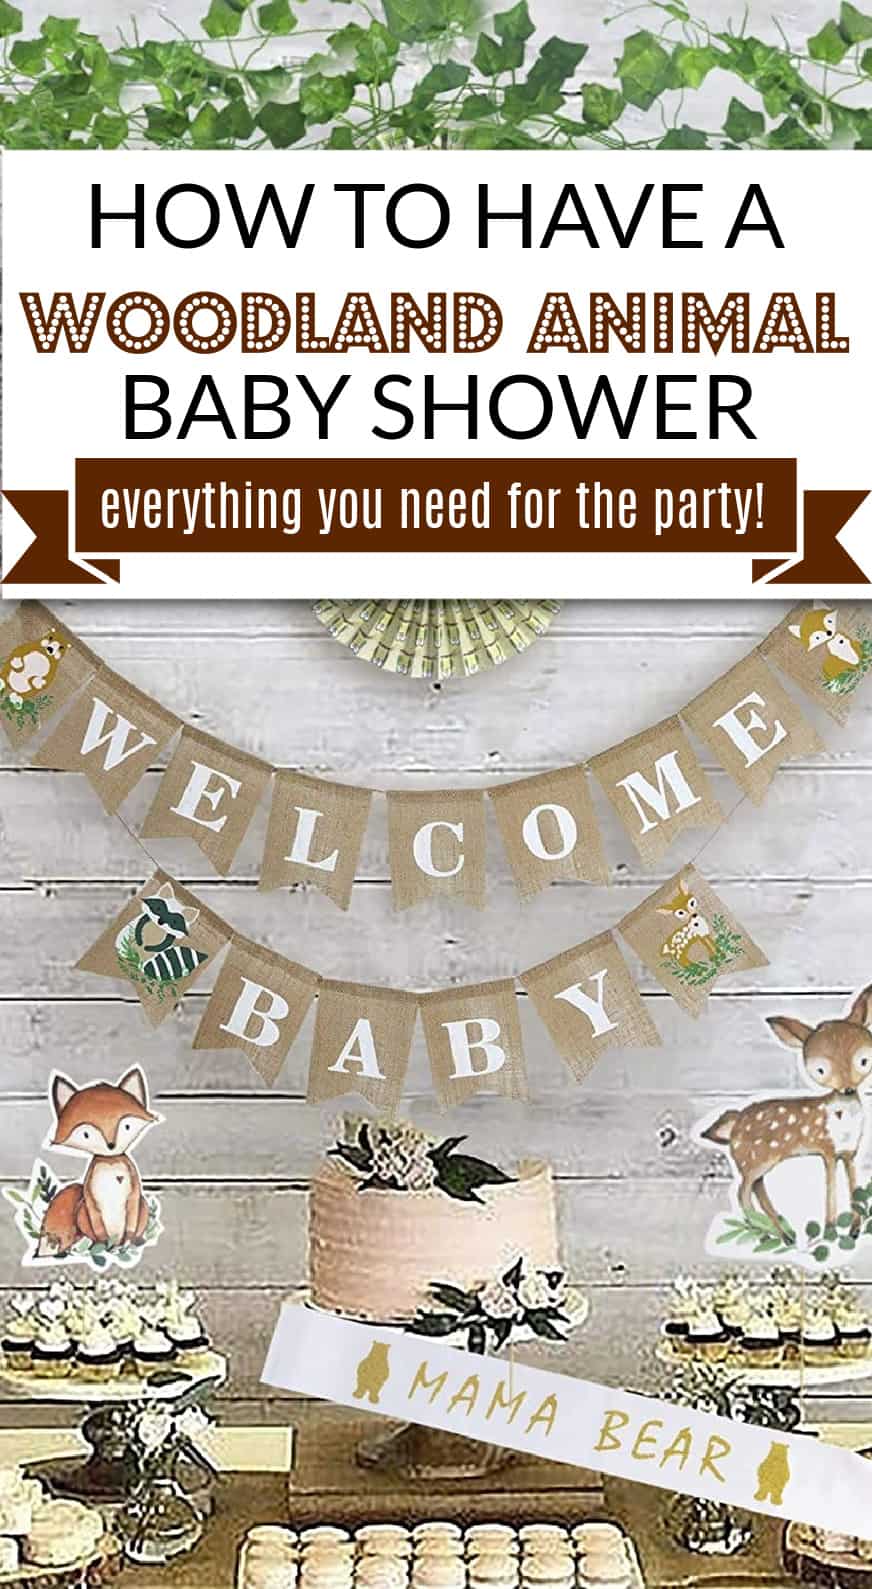 How to Throw a Woodland Animal Themed Baby Shower